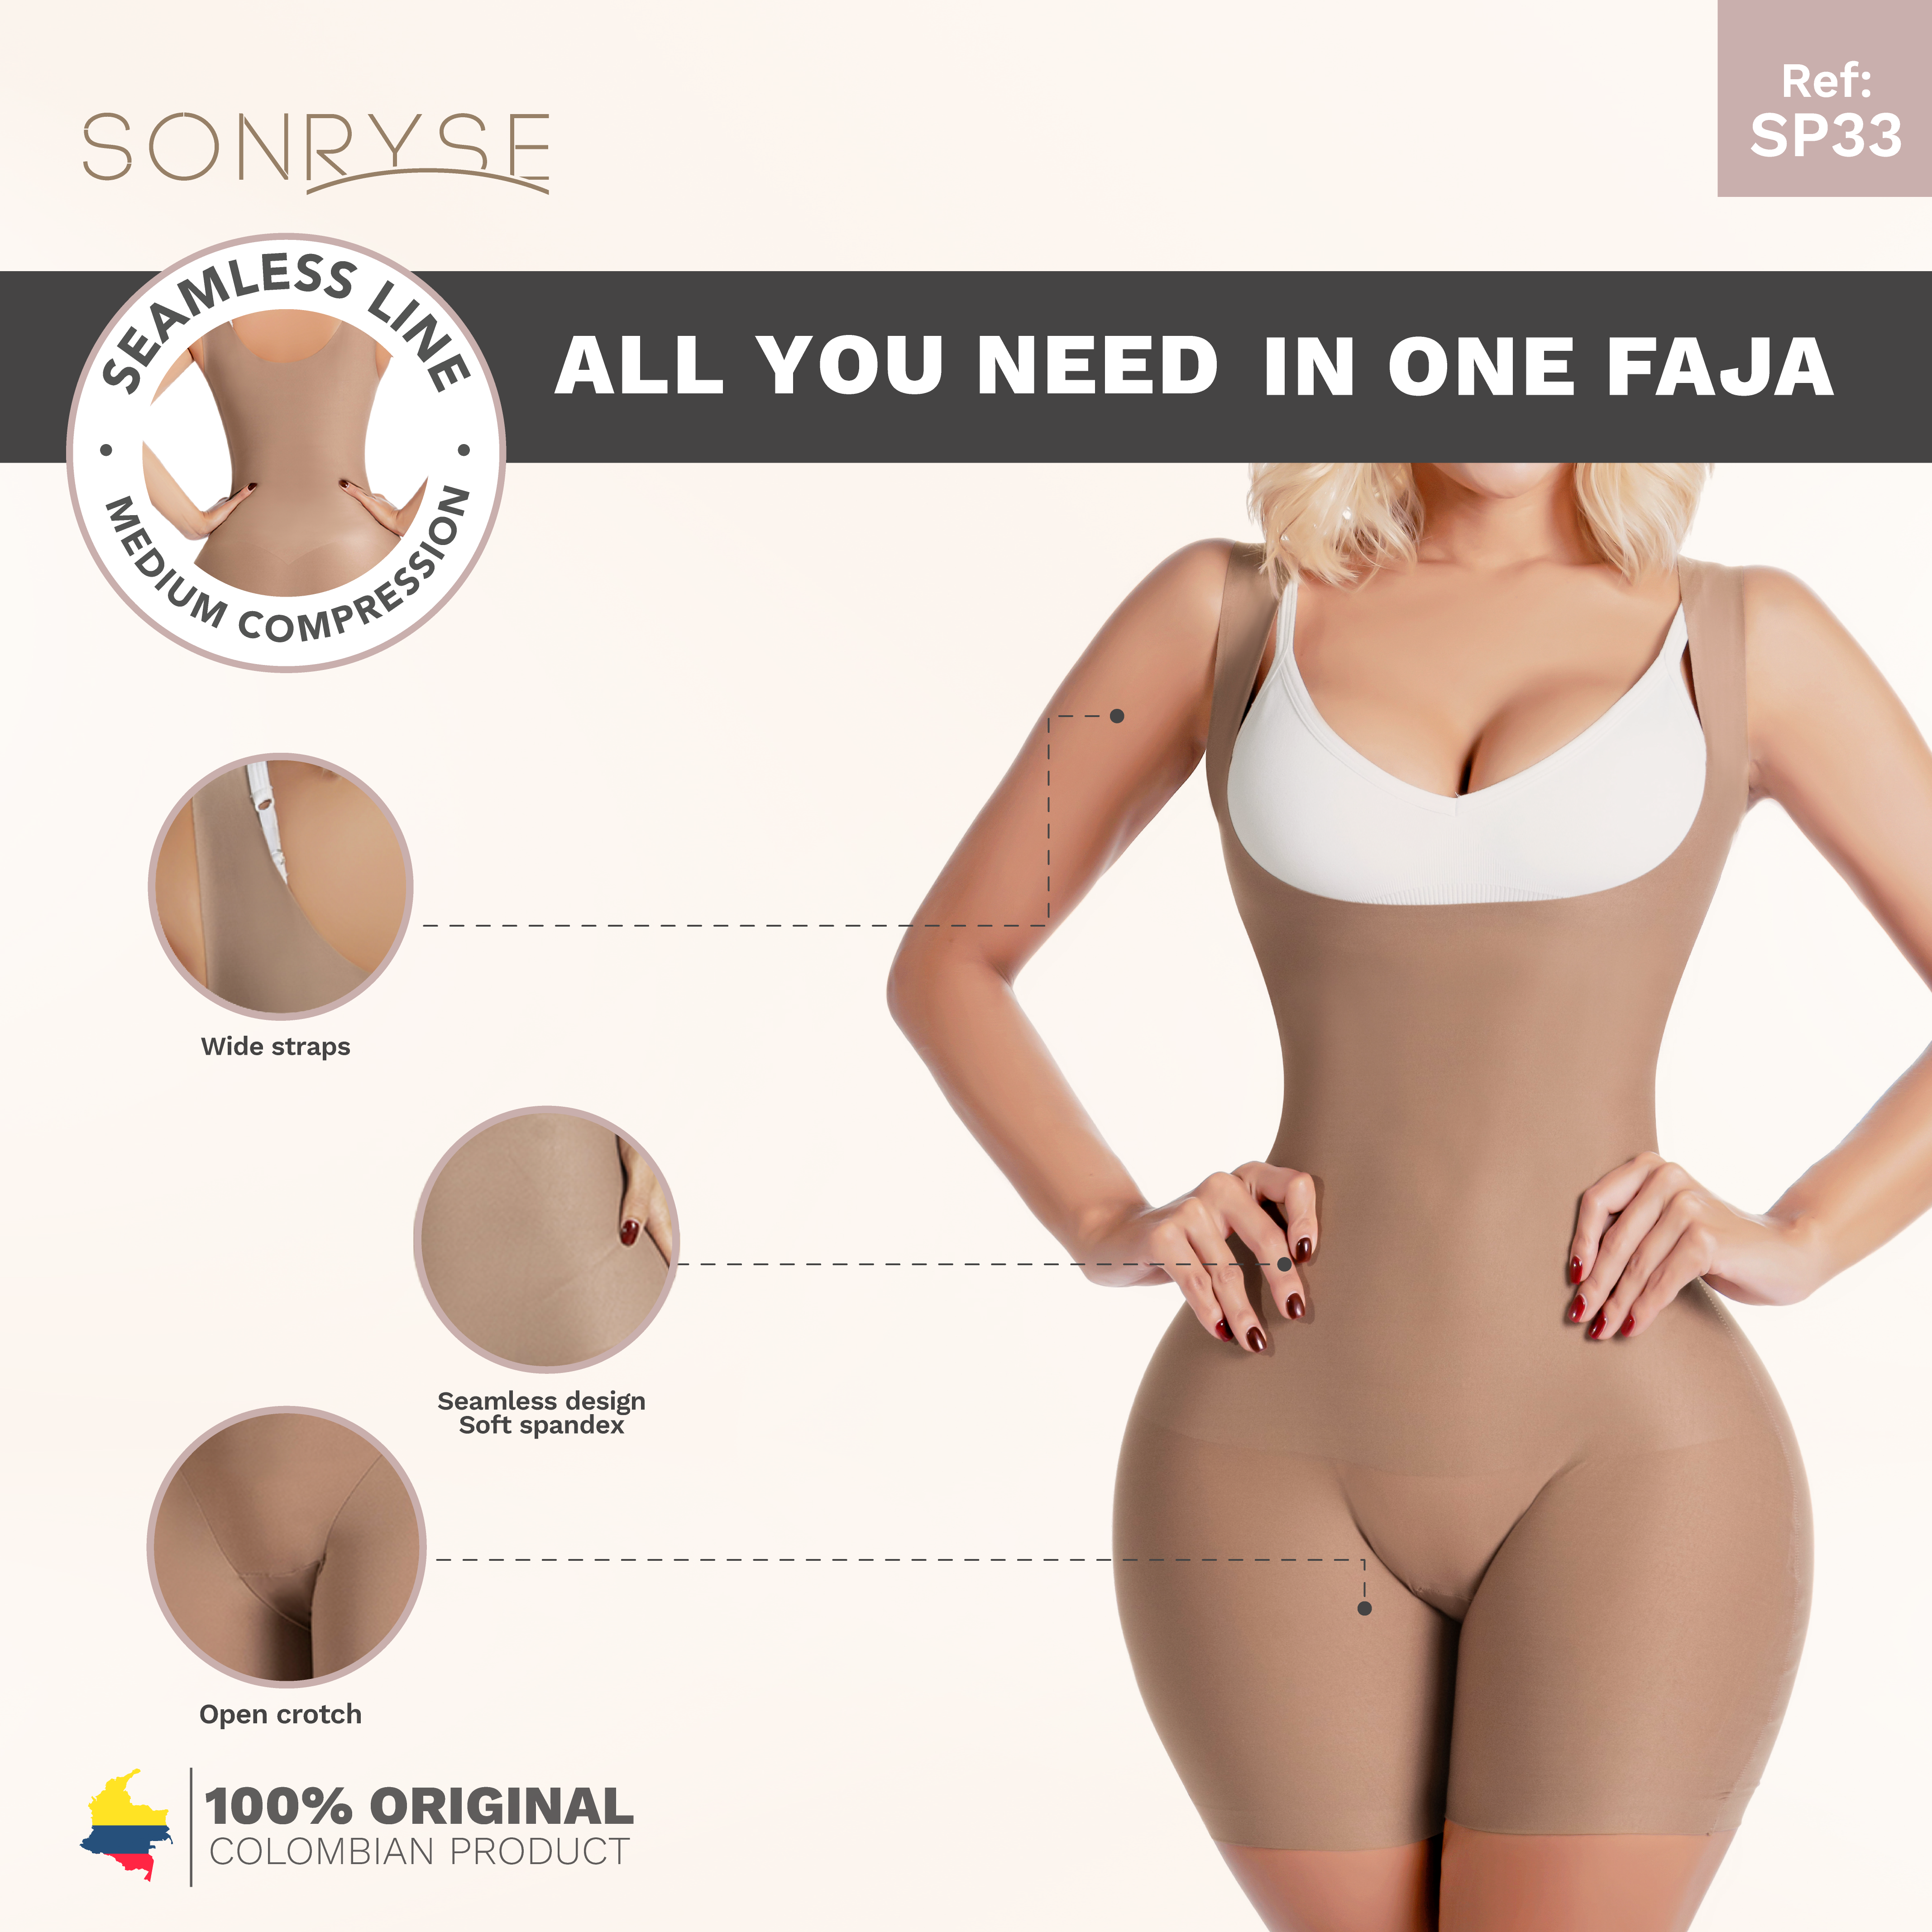 This is what you should know about the Colombian body shaper for women